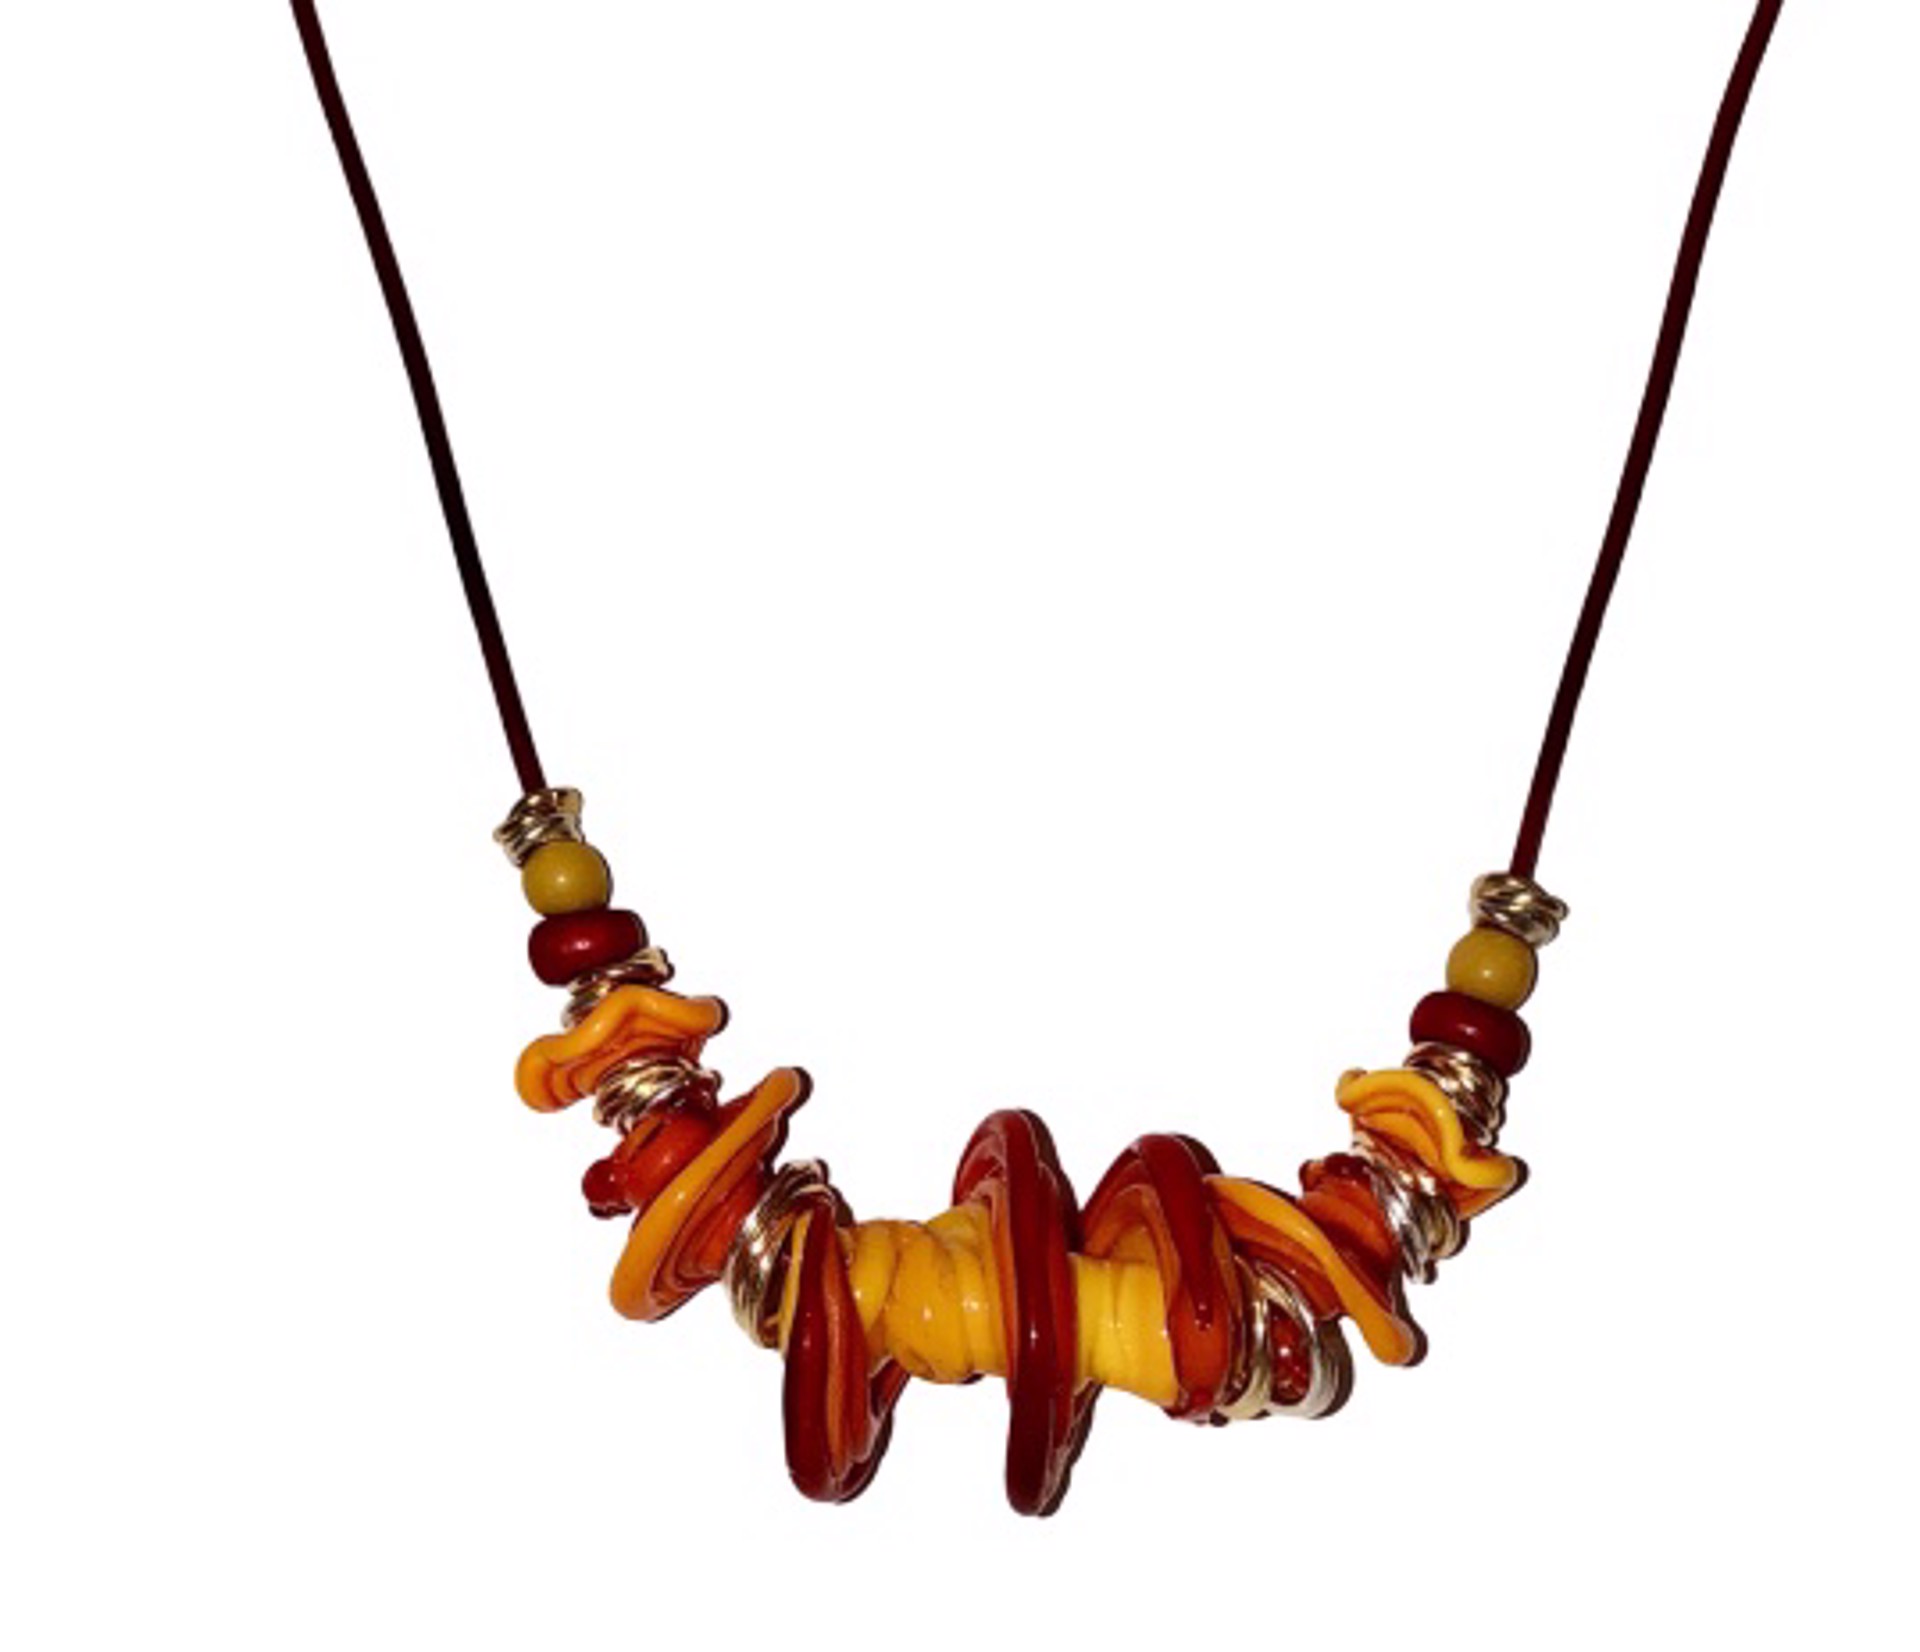 Necklace - Fall Over Me - Handmade lampwork glass Orange, Red, Yellow spiral/ruffle disks and beads on red leather with stainless steel clasp/chain 18-20" adjustable by Melissa Rogers